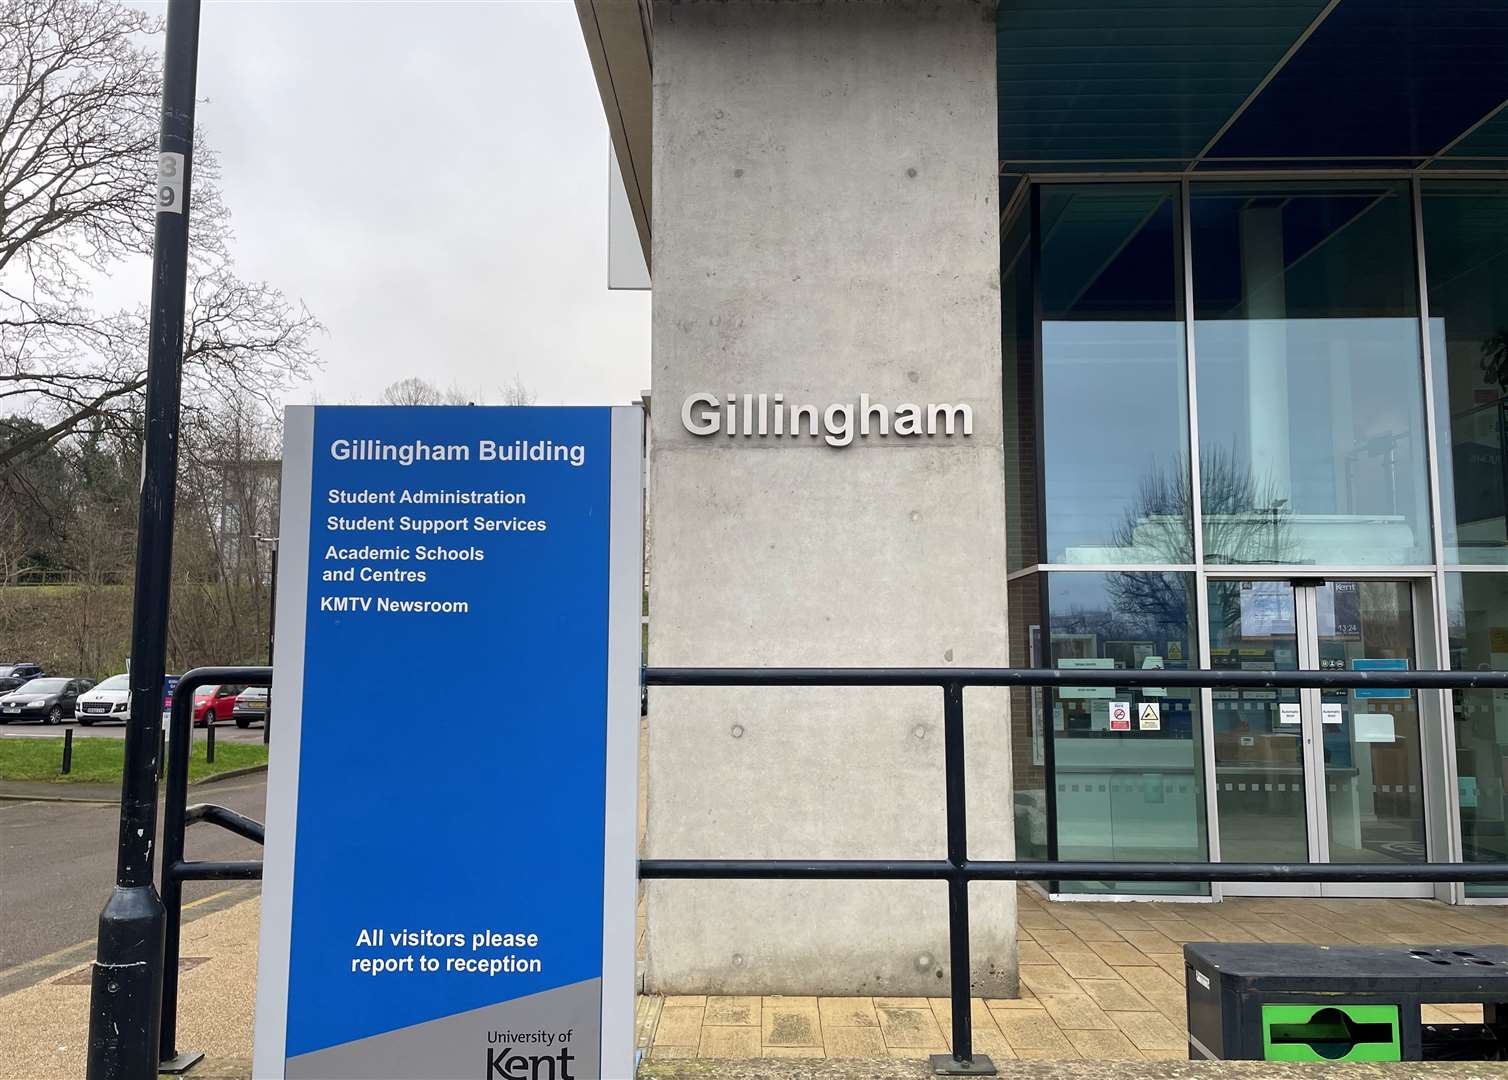 The university’s Gillingham Building on the Medway campus is set to be handed over to the University of Greenwich